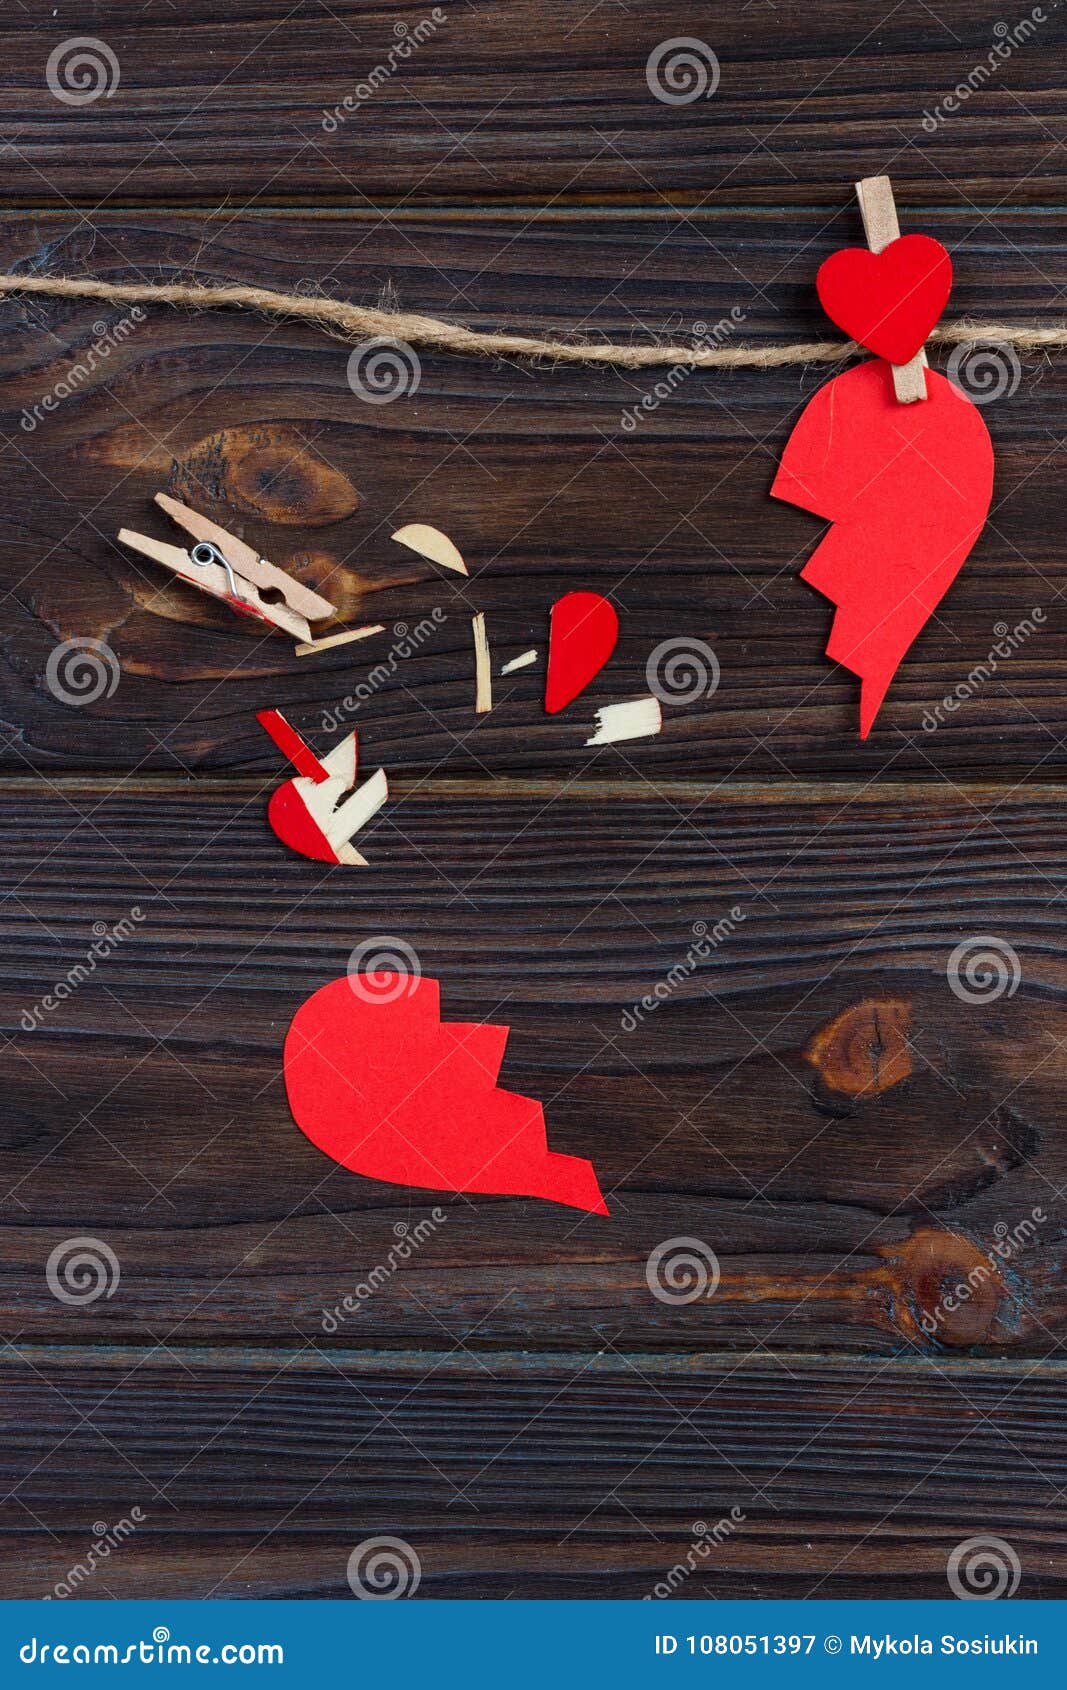 Broken Heart Breakup Collection and Divorce Icon. Red Paper Shaped ...